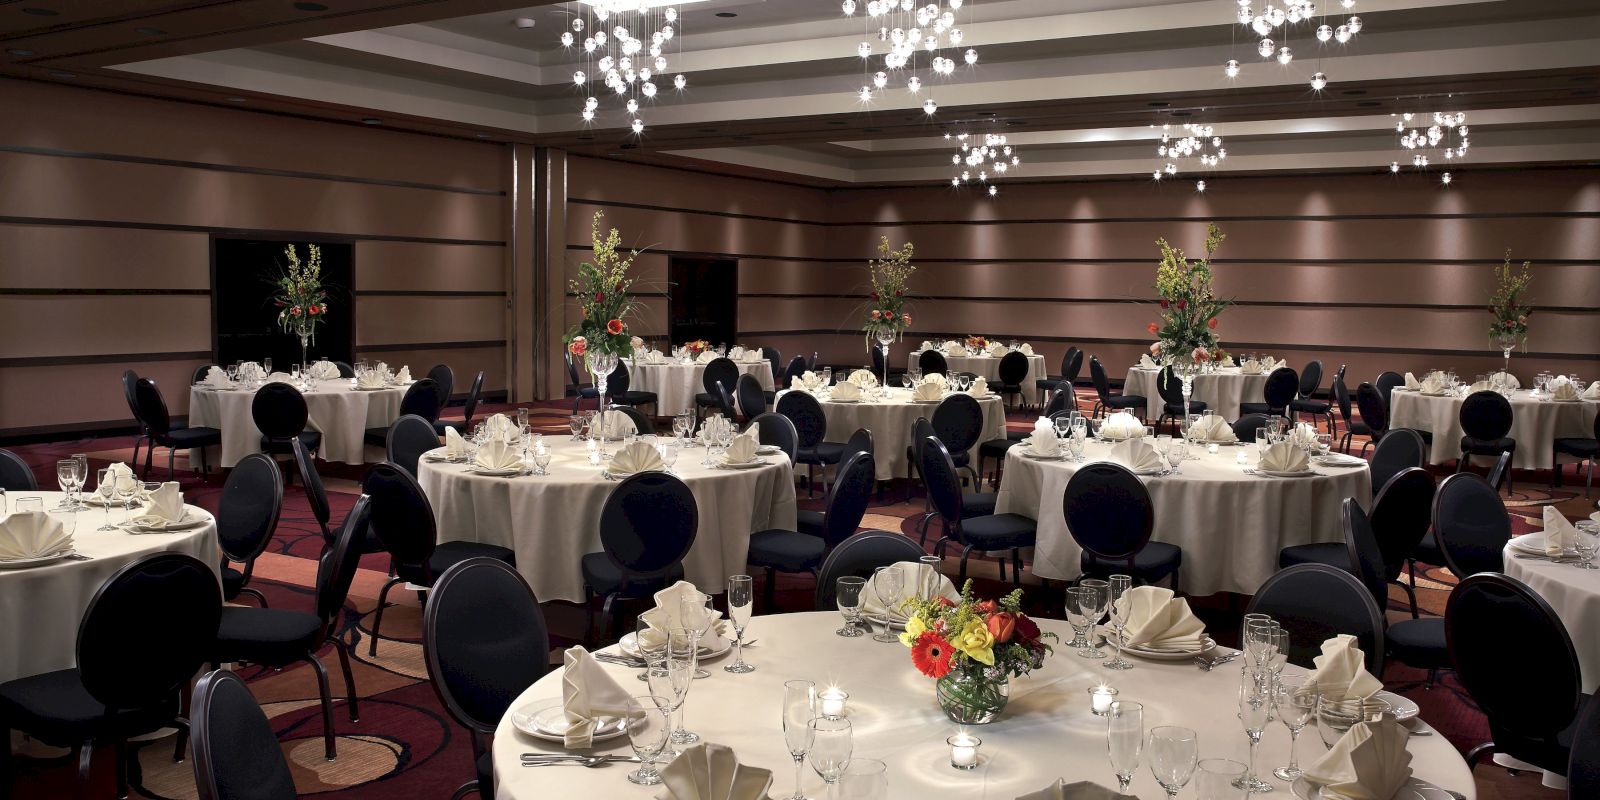 The image shows an elegantly set banquet hall with round tables decorated with flowers, napkins, glassware, and cutlery under modern chandeliers.